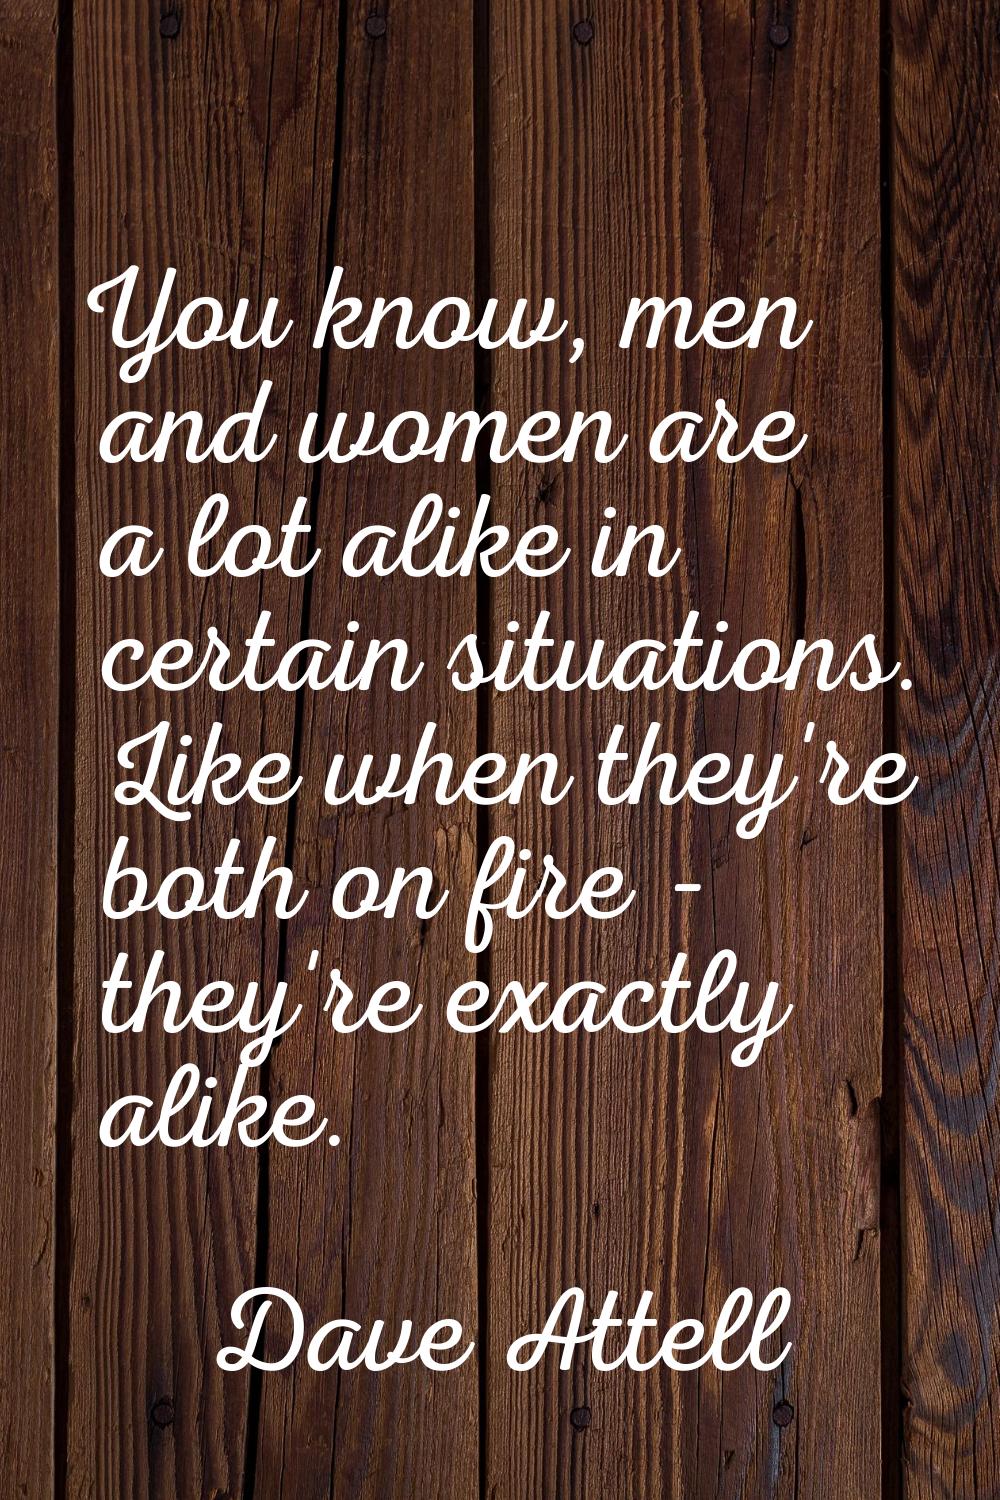 You know, men and women are a lot alike in certain situations. Like when they're both on fire - the